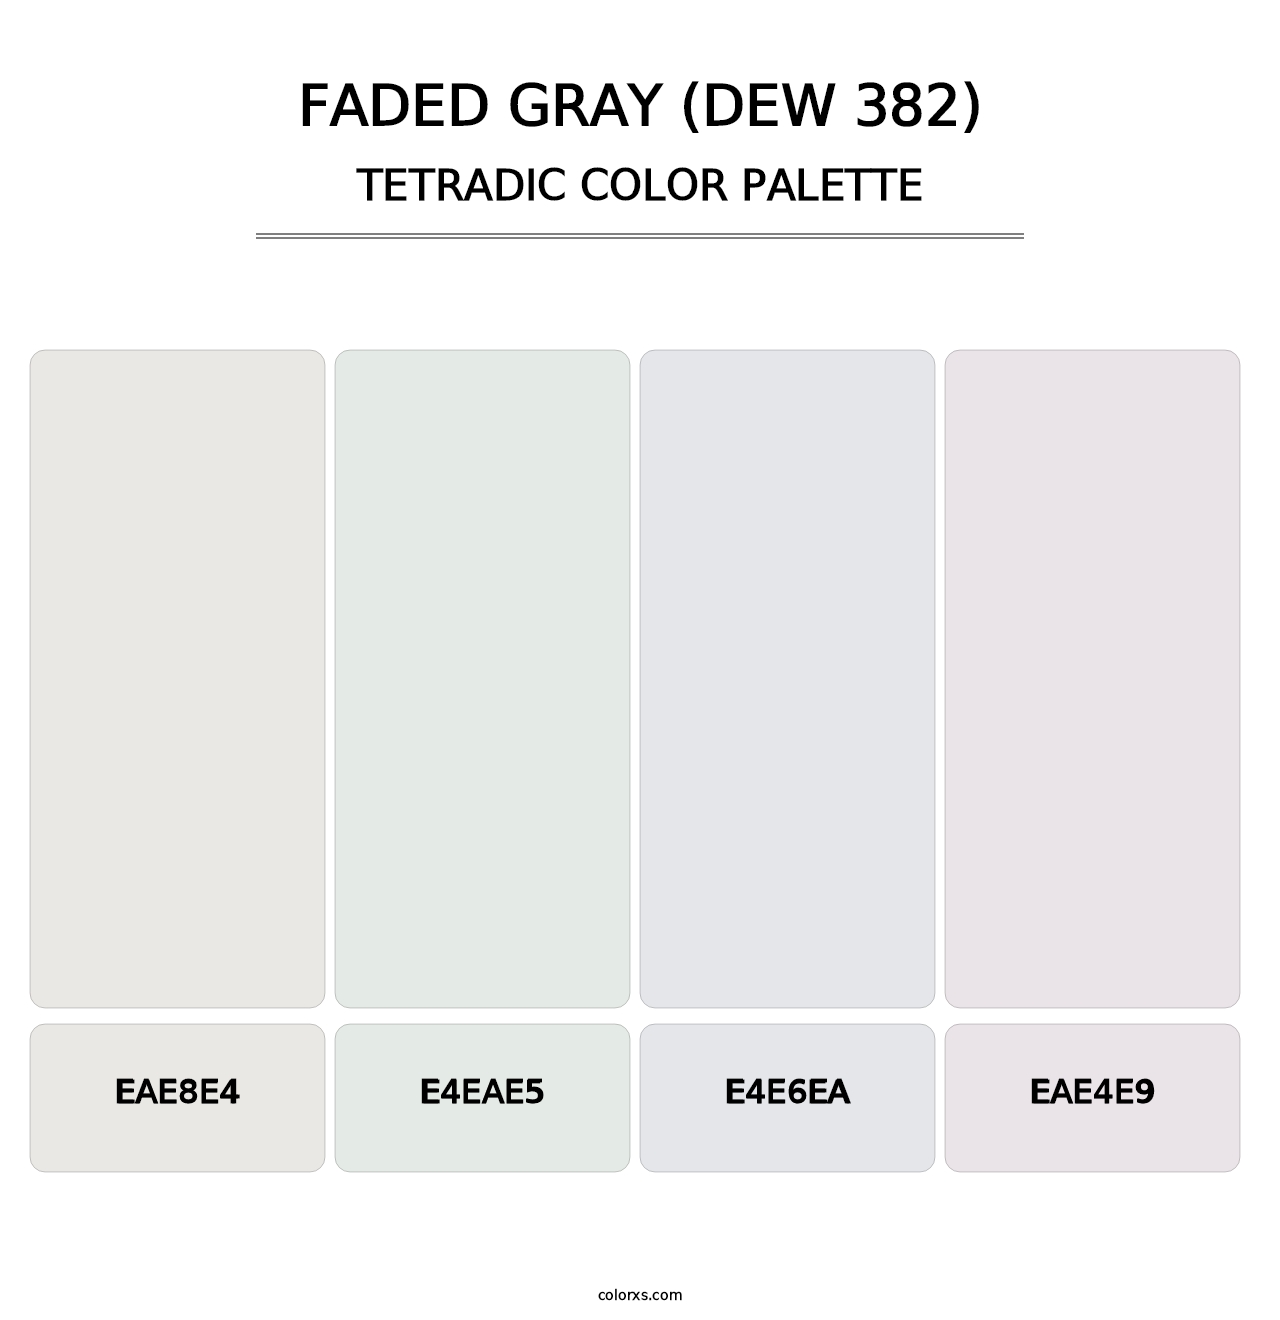 Faded Gray (DEW 382) - Tetradic Color Palette